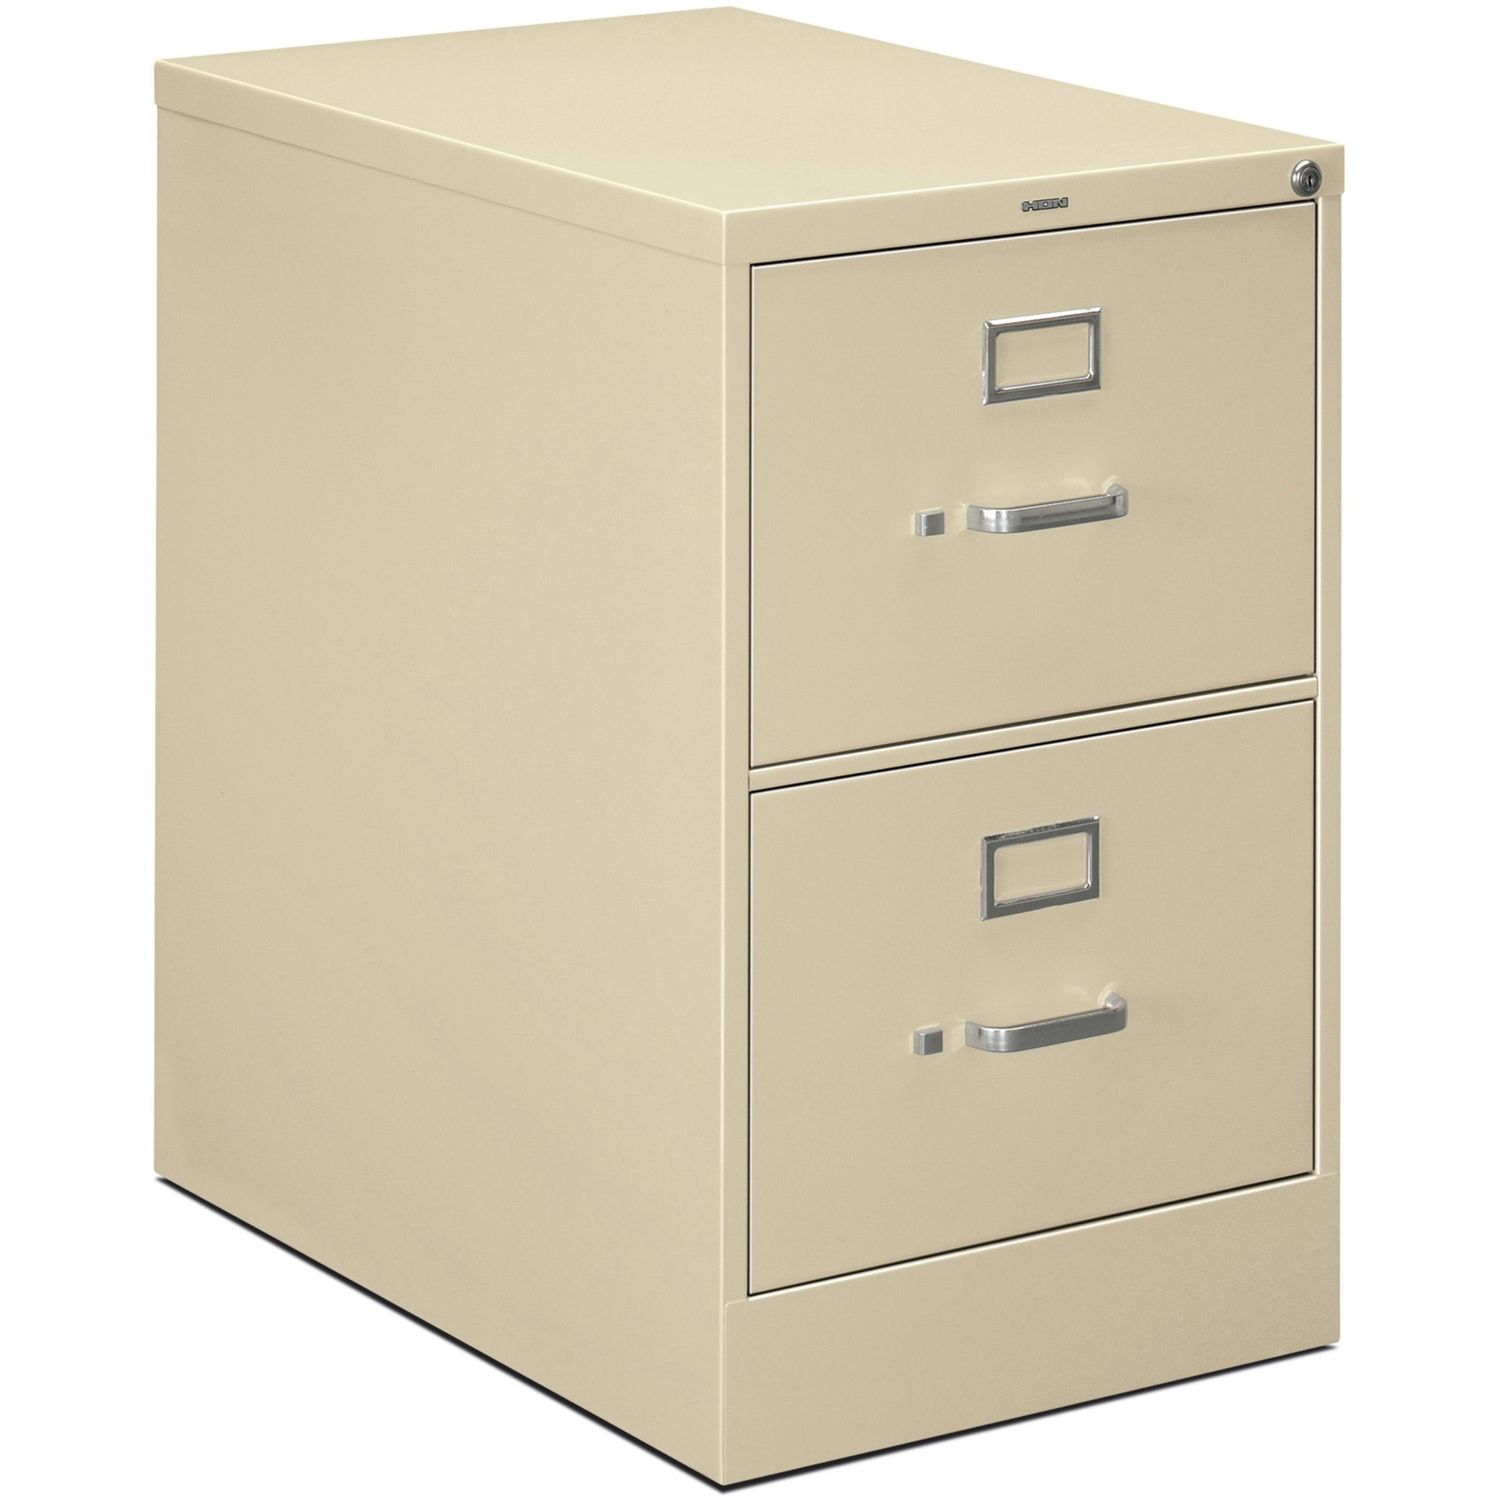 H320 Series 2-Drawer Vertical File 18.3" x 26.5" x 29", 2 x Drawer(s) for File, Legal, Vertical, Rust Resistant, Security Lock, Label Holder, Putty, Baked Enamel, Metal, Aluminum, Recycled